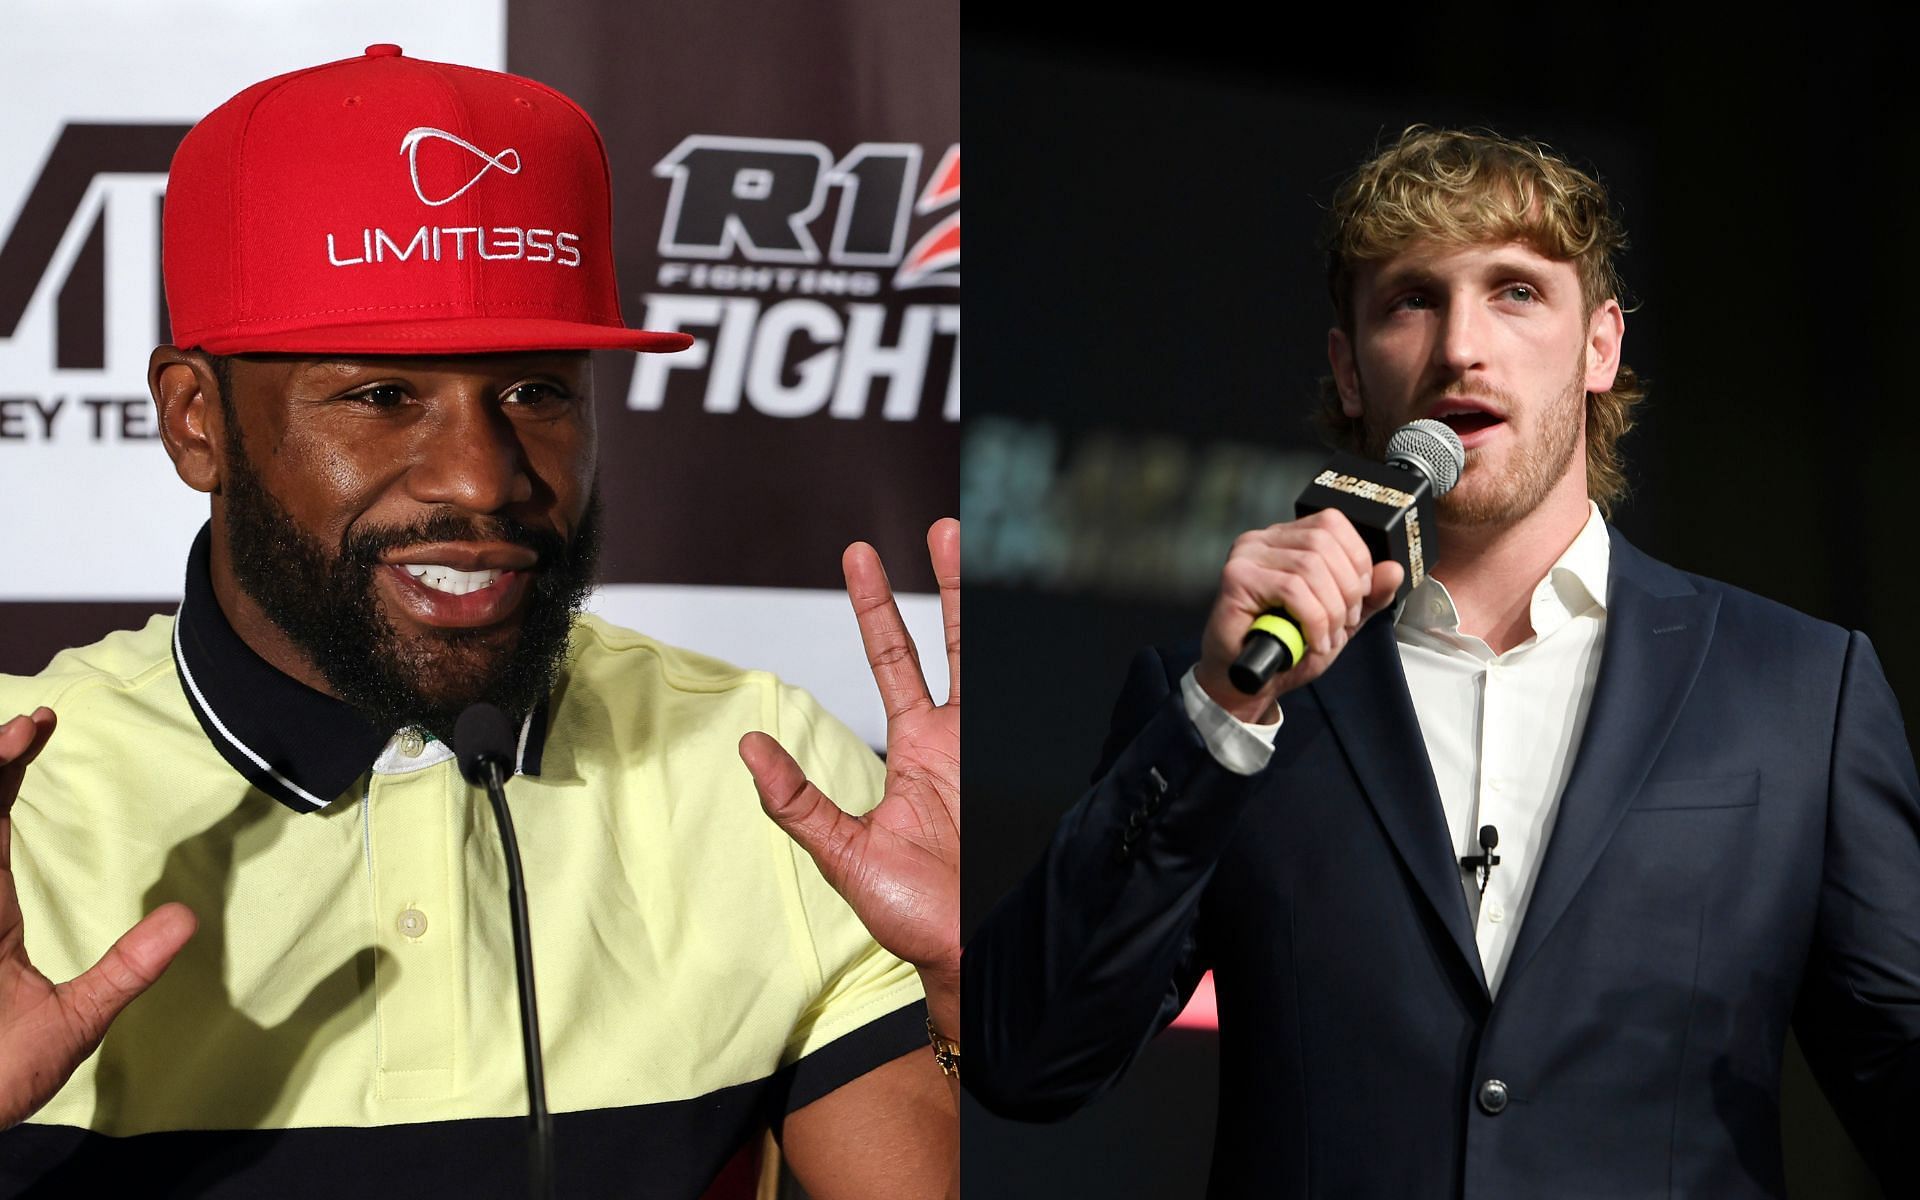 Floyd Mayweather (left) and Logan Paul (right) (Image credits Getty)